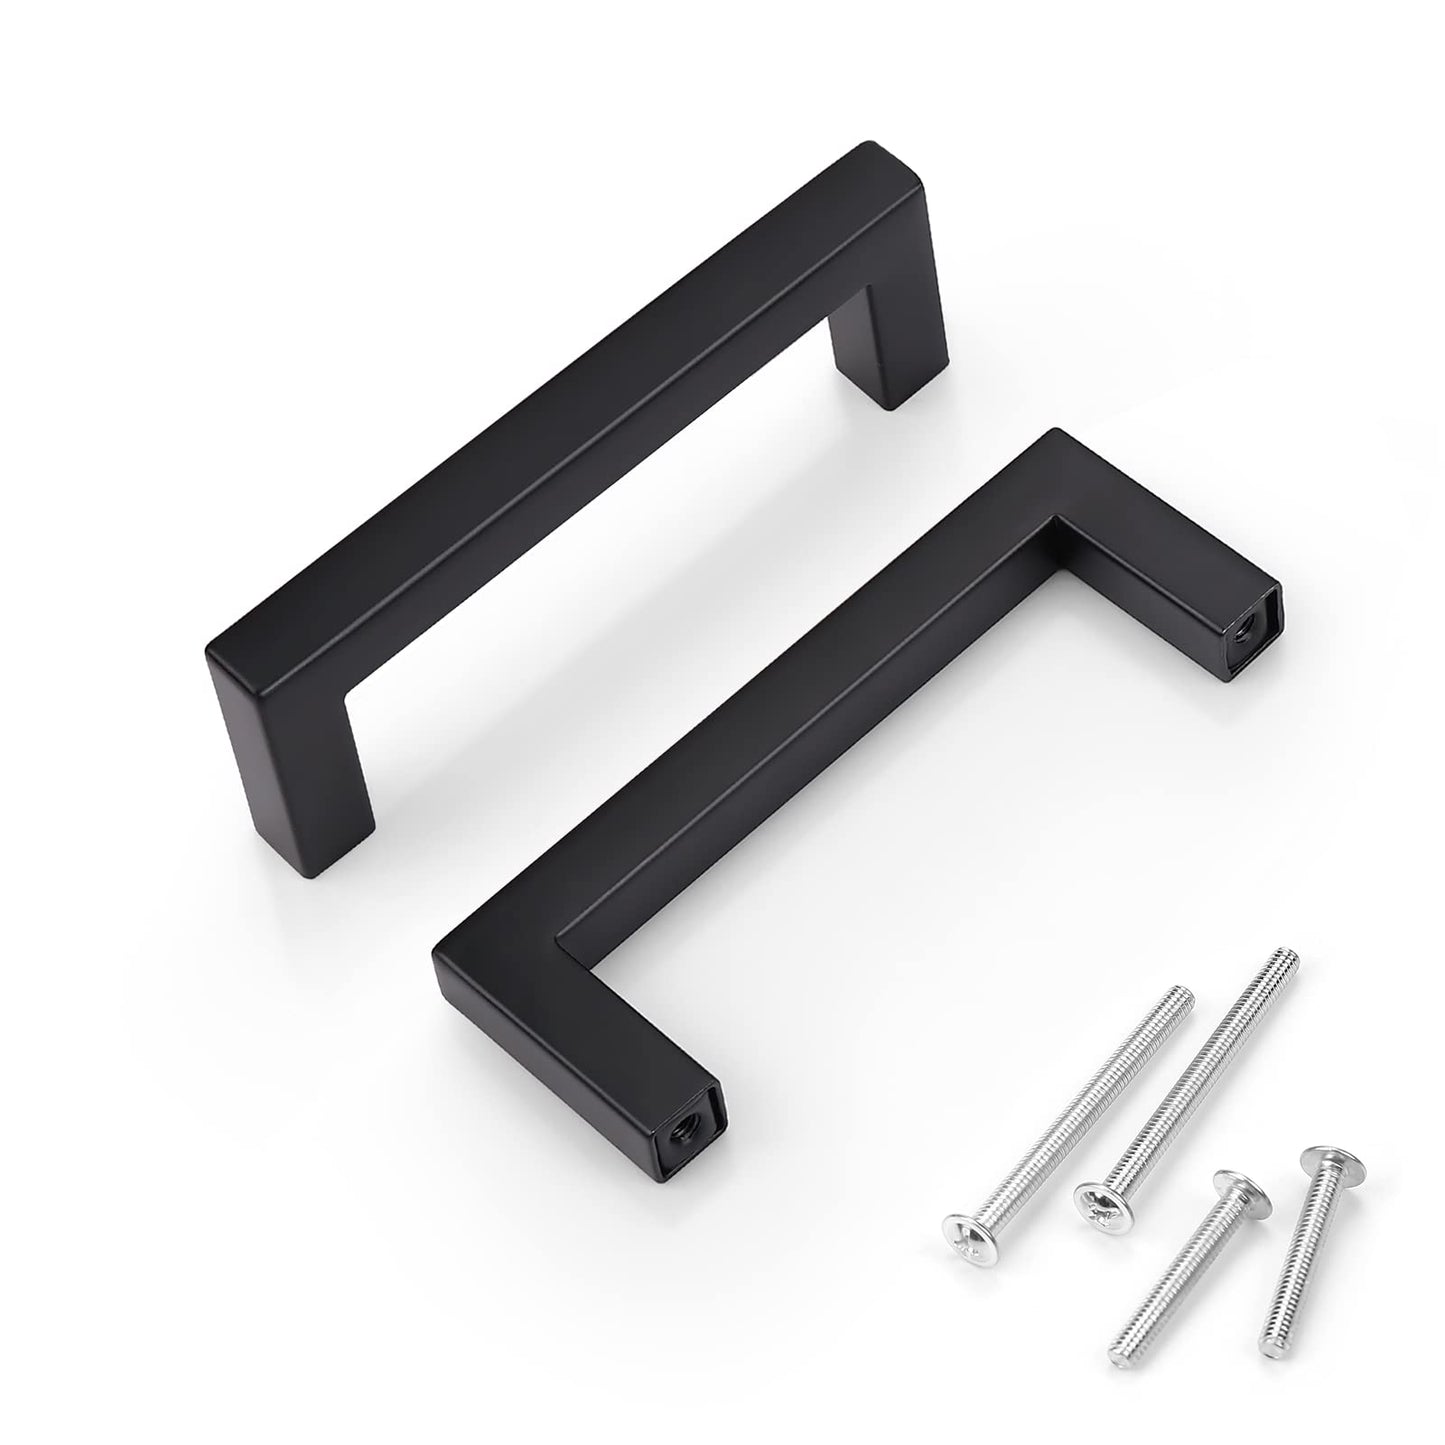 Matte Black Stainless Steel Pulls for Cabinets/Drawers (2-1/2'' - 10'') - PDDJS10HBK